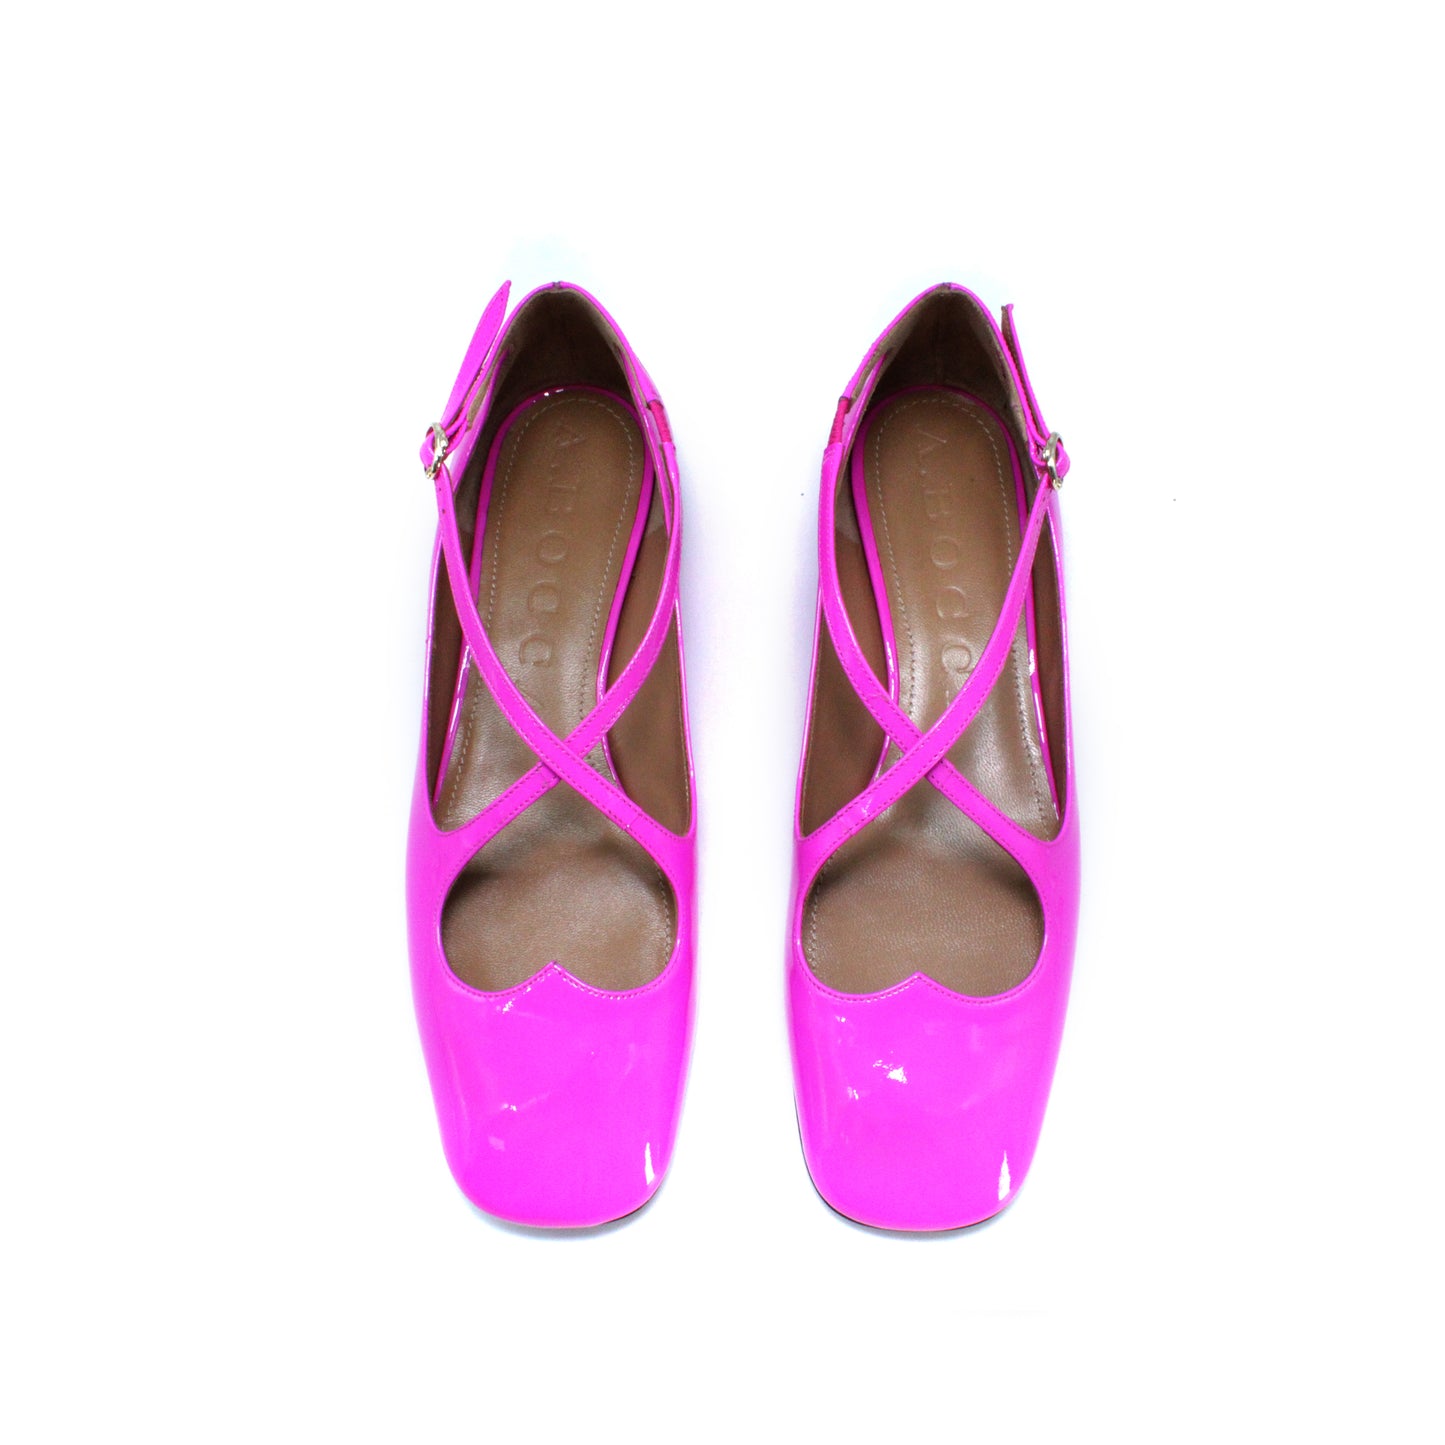 Pump Two for Love in fuchsia patent leather